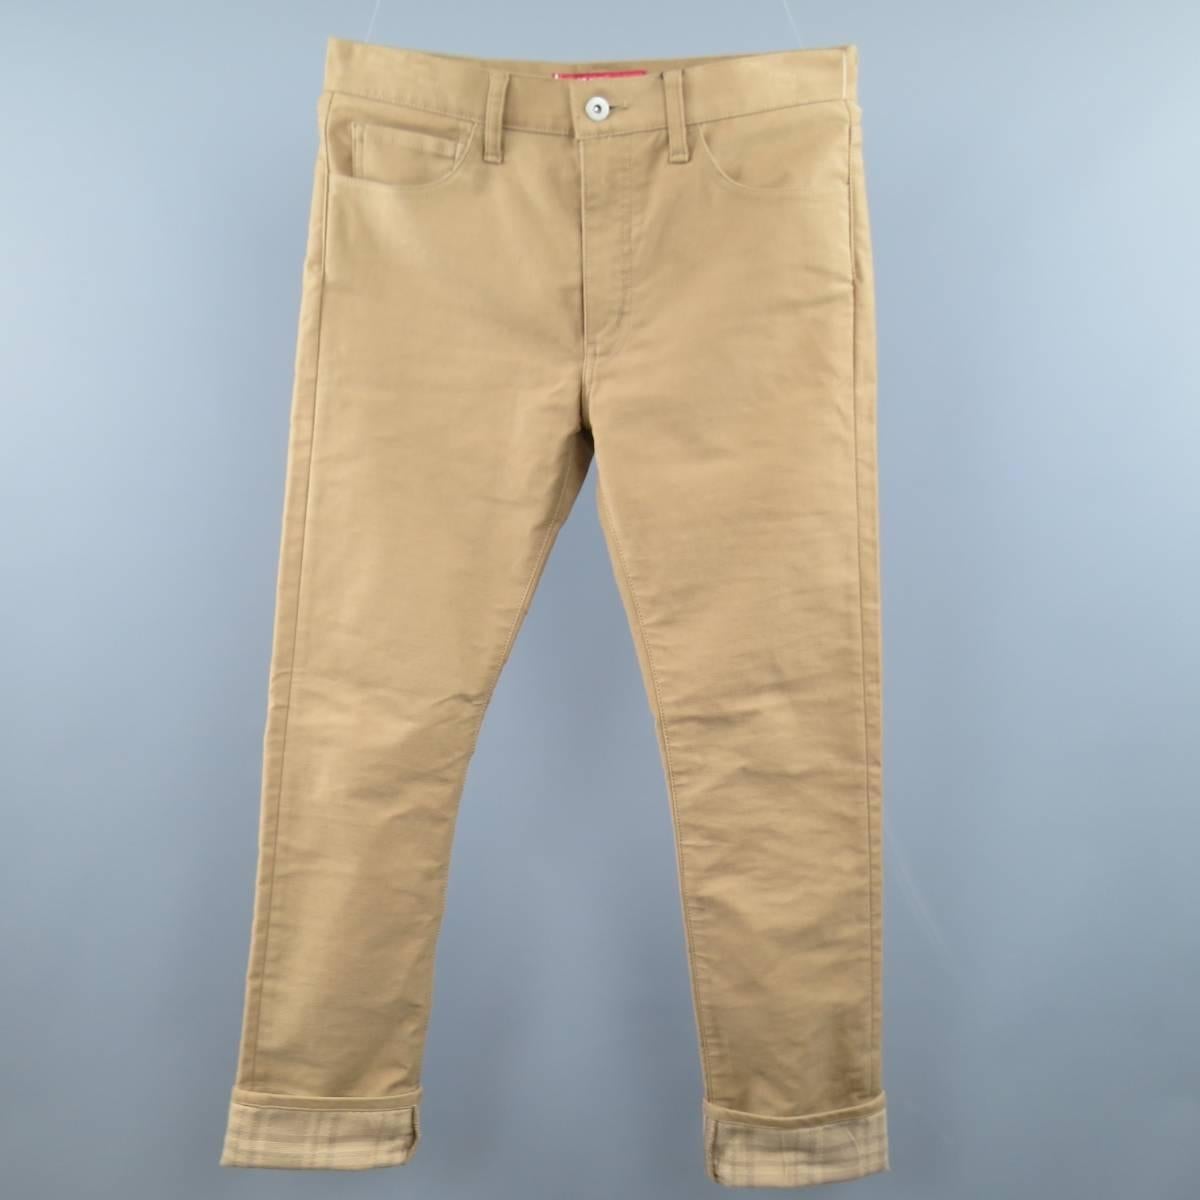 JUNYA WATANABE x LEVI'S jeans come in a tan jeans come in a classic cut and feature a plaid cuff lining, and brown leather pockets. Made in Japan.
 
New with Tags.
Marked: 510 32 32
 
Measurements:
 
Waist: 33 in.
Rise: 10.5 in.
Inseam: 30 in.


Web